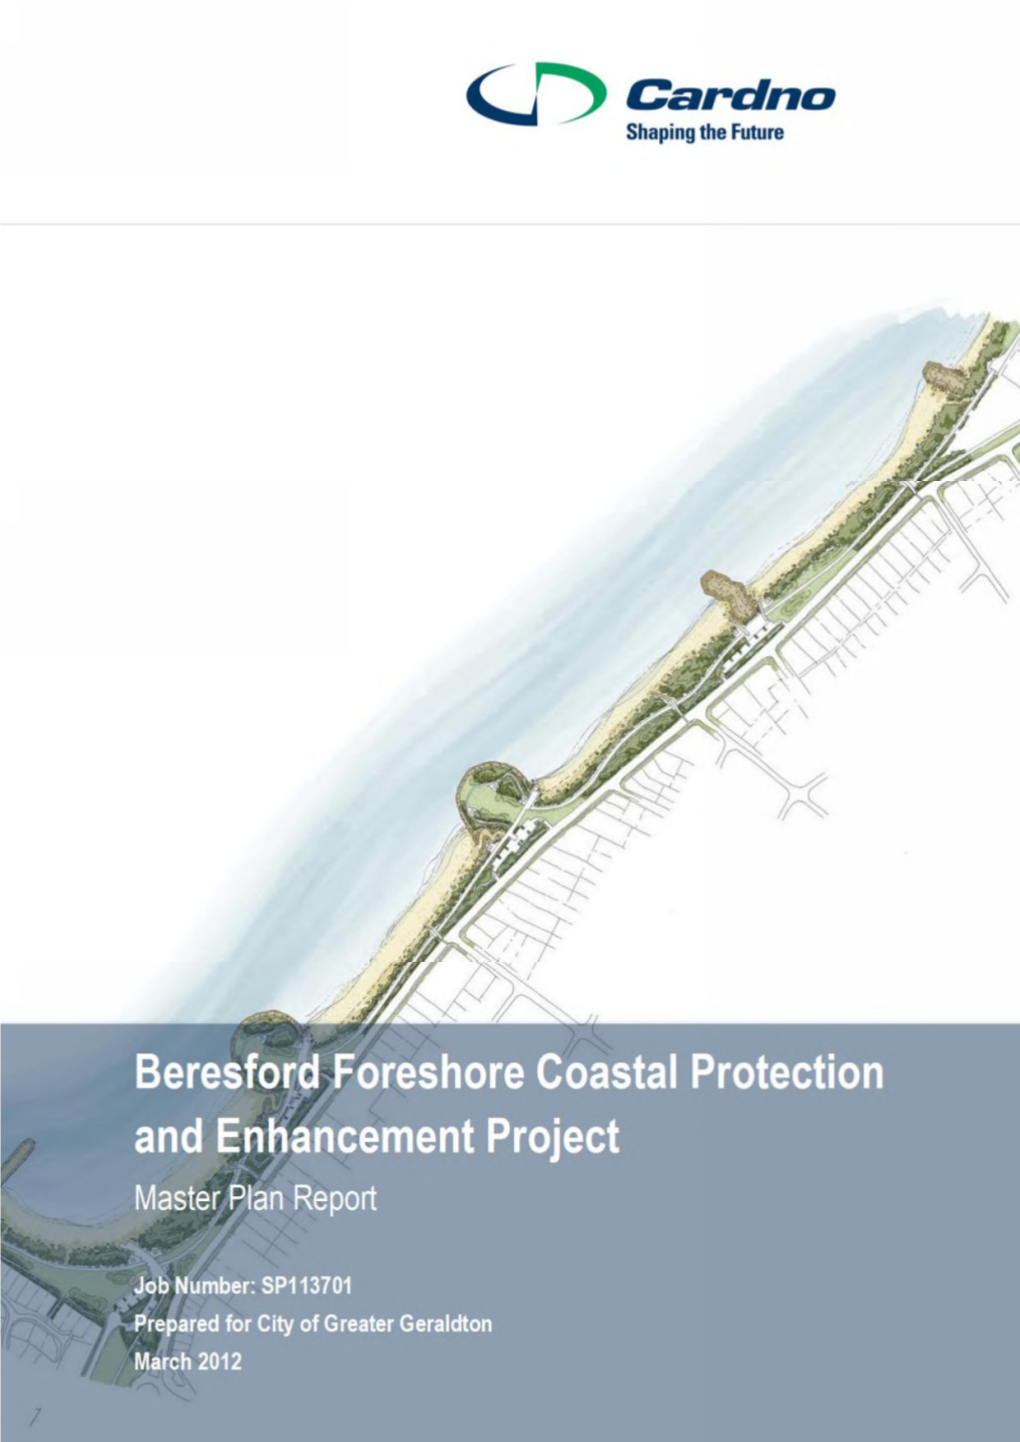 Beresford Foreshore Coastal Protection and Enhancement–Master Plan Report Prepared for City of Greater Geraldton